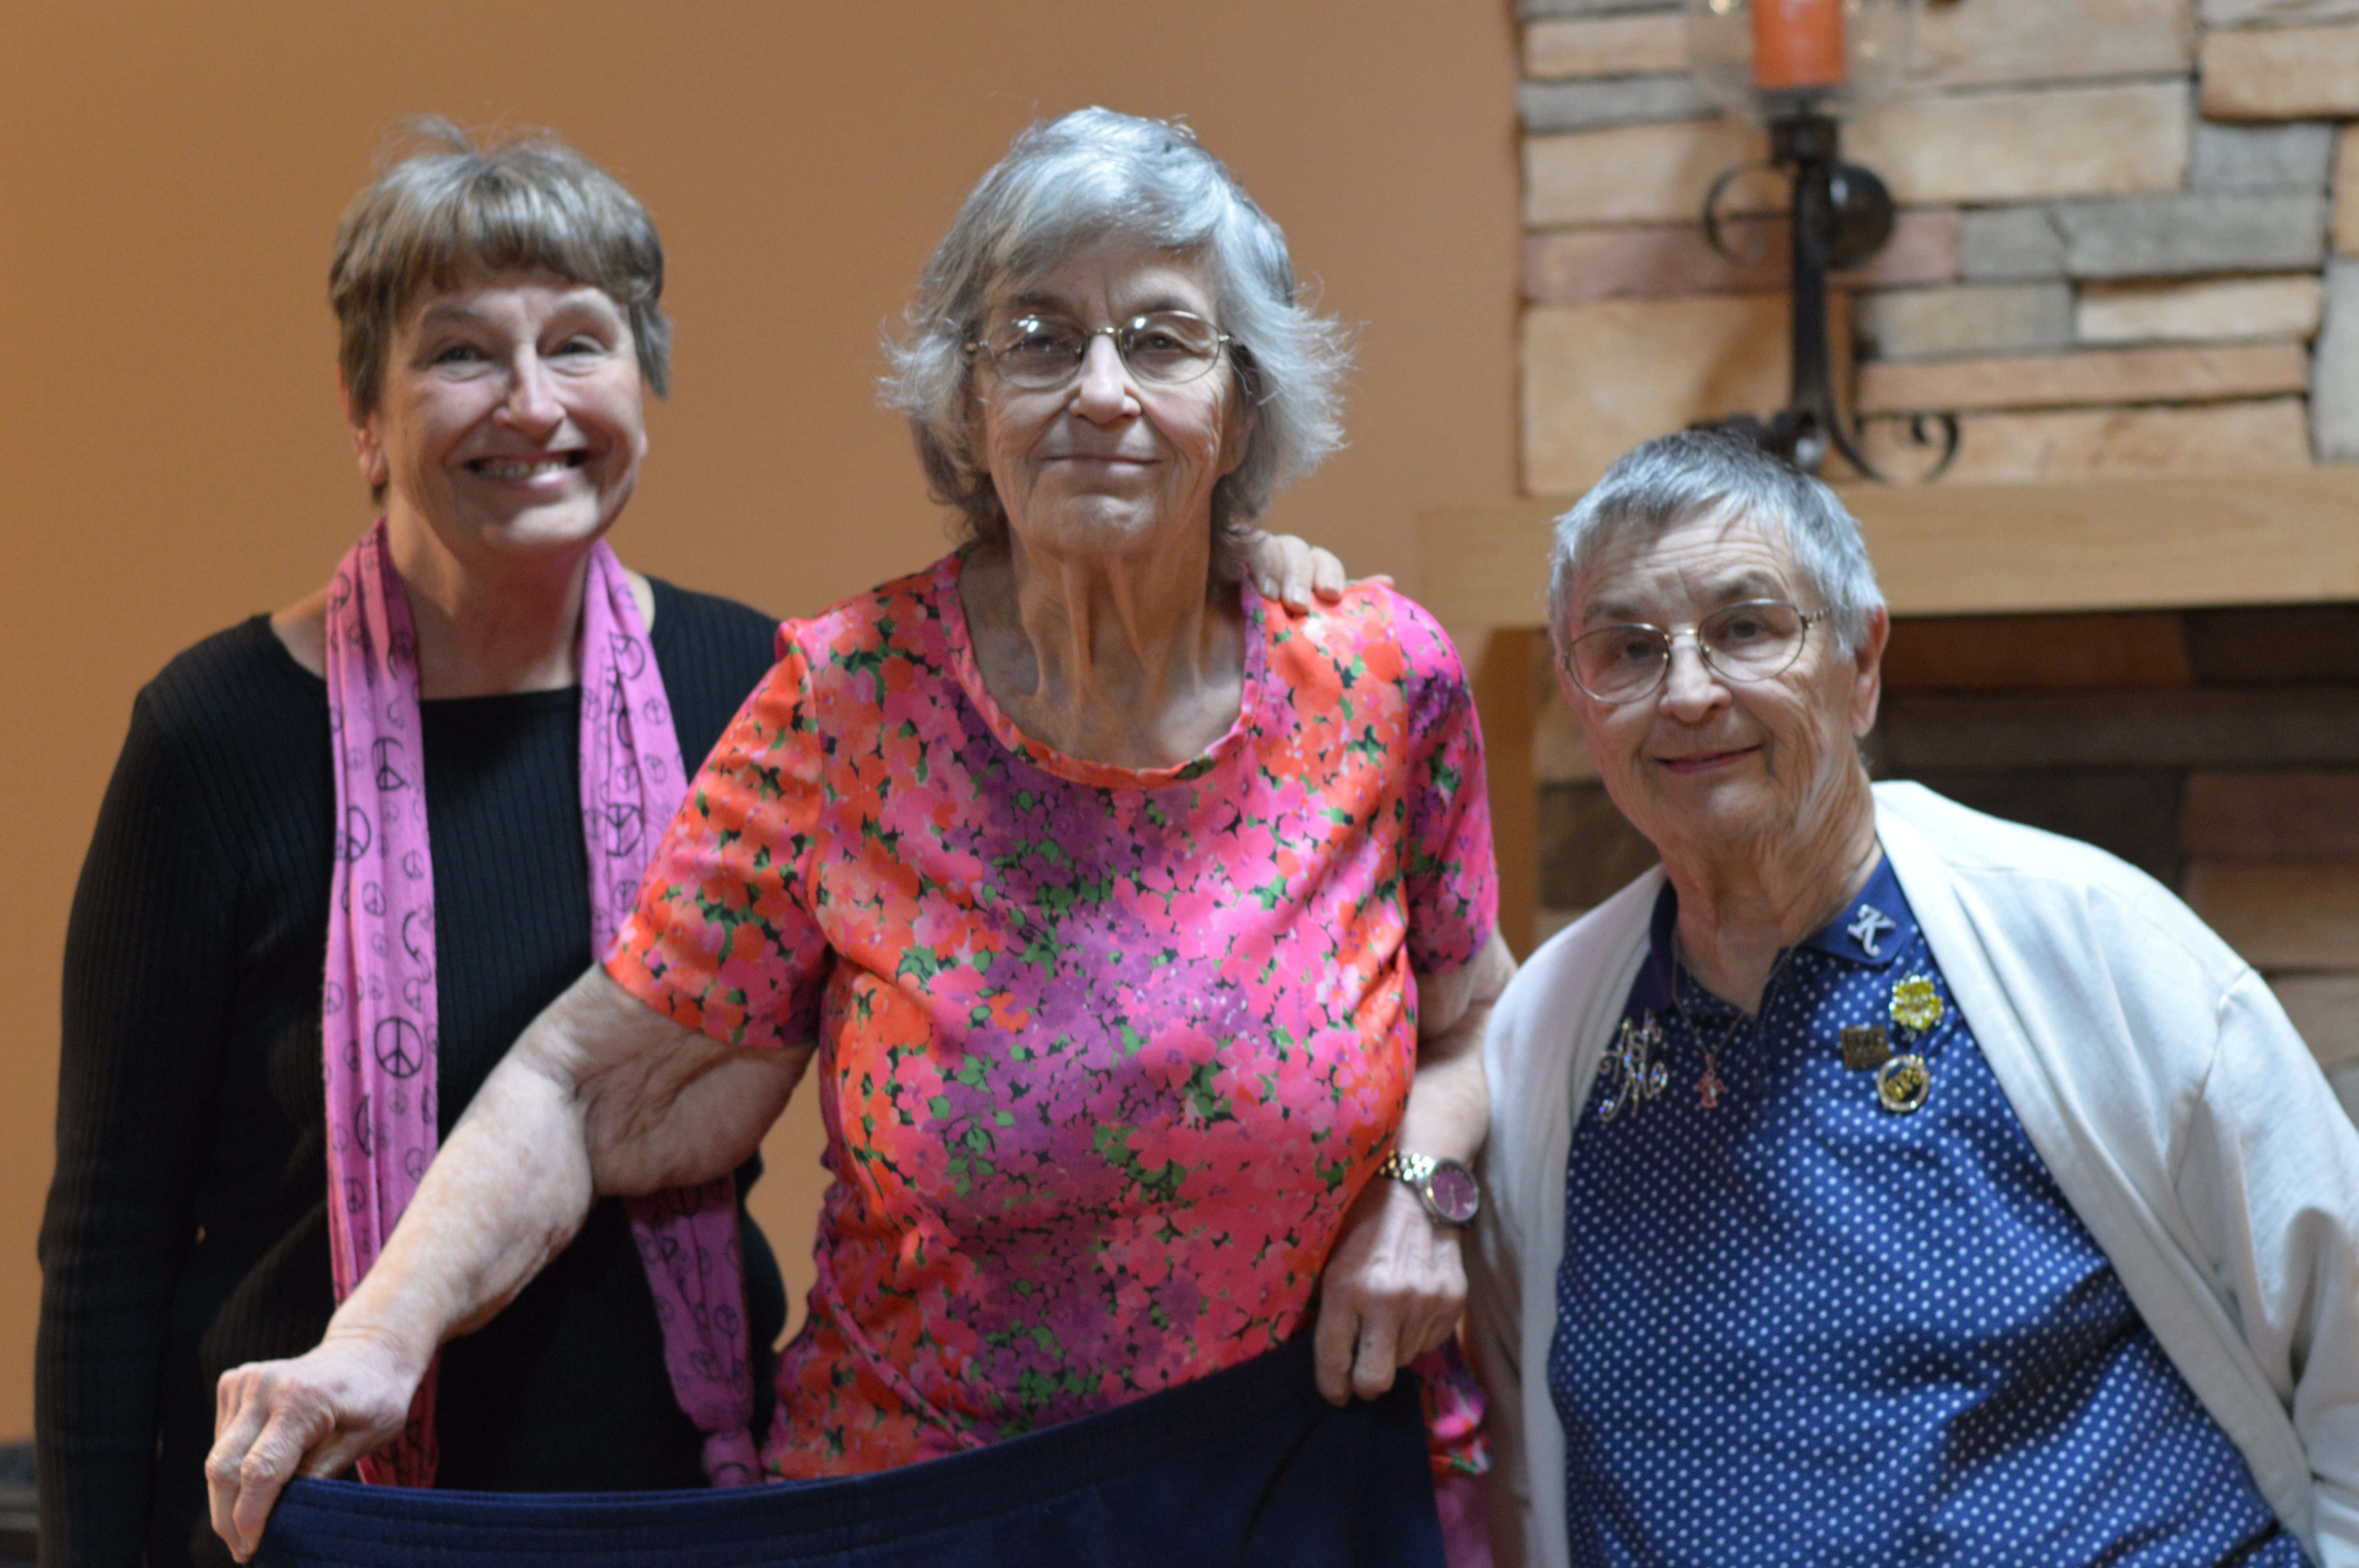 From left to right, Shirley Gauthier, Mary Phillips and Jo Tegge are all success stories with the Eugene chapter of Take Off Pounds Sensibly (TOPS). Gauthier has lost more than 40 pounds, Phillips has lost nearly 164 pounds and Tegge is a KOPS, Keeps Off Pounds Sensibly, or a person who has reached their goal weight and kept it off for at least a year. Photo by Vanessa Salvia.